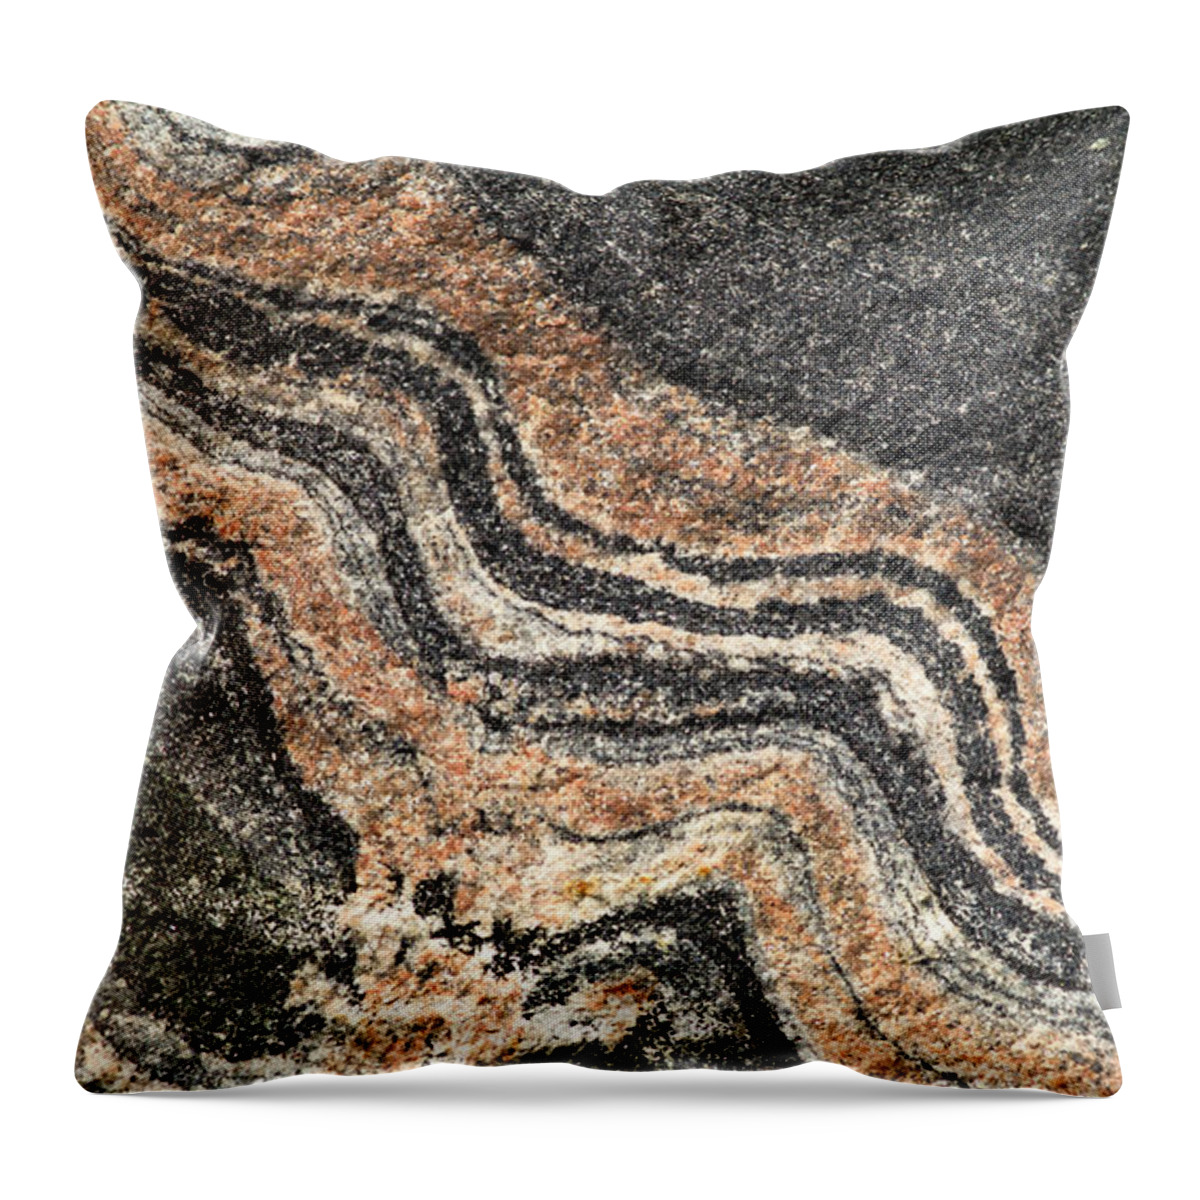 Banded Throw Pillow featuring the photograph Gneiss Rock by Les Palenik